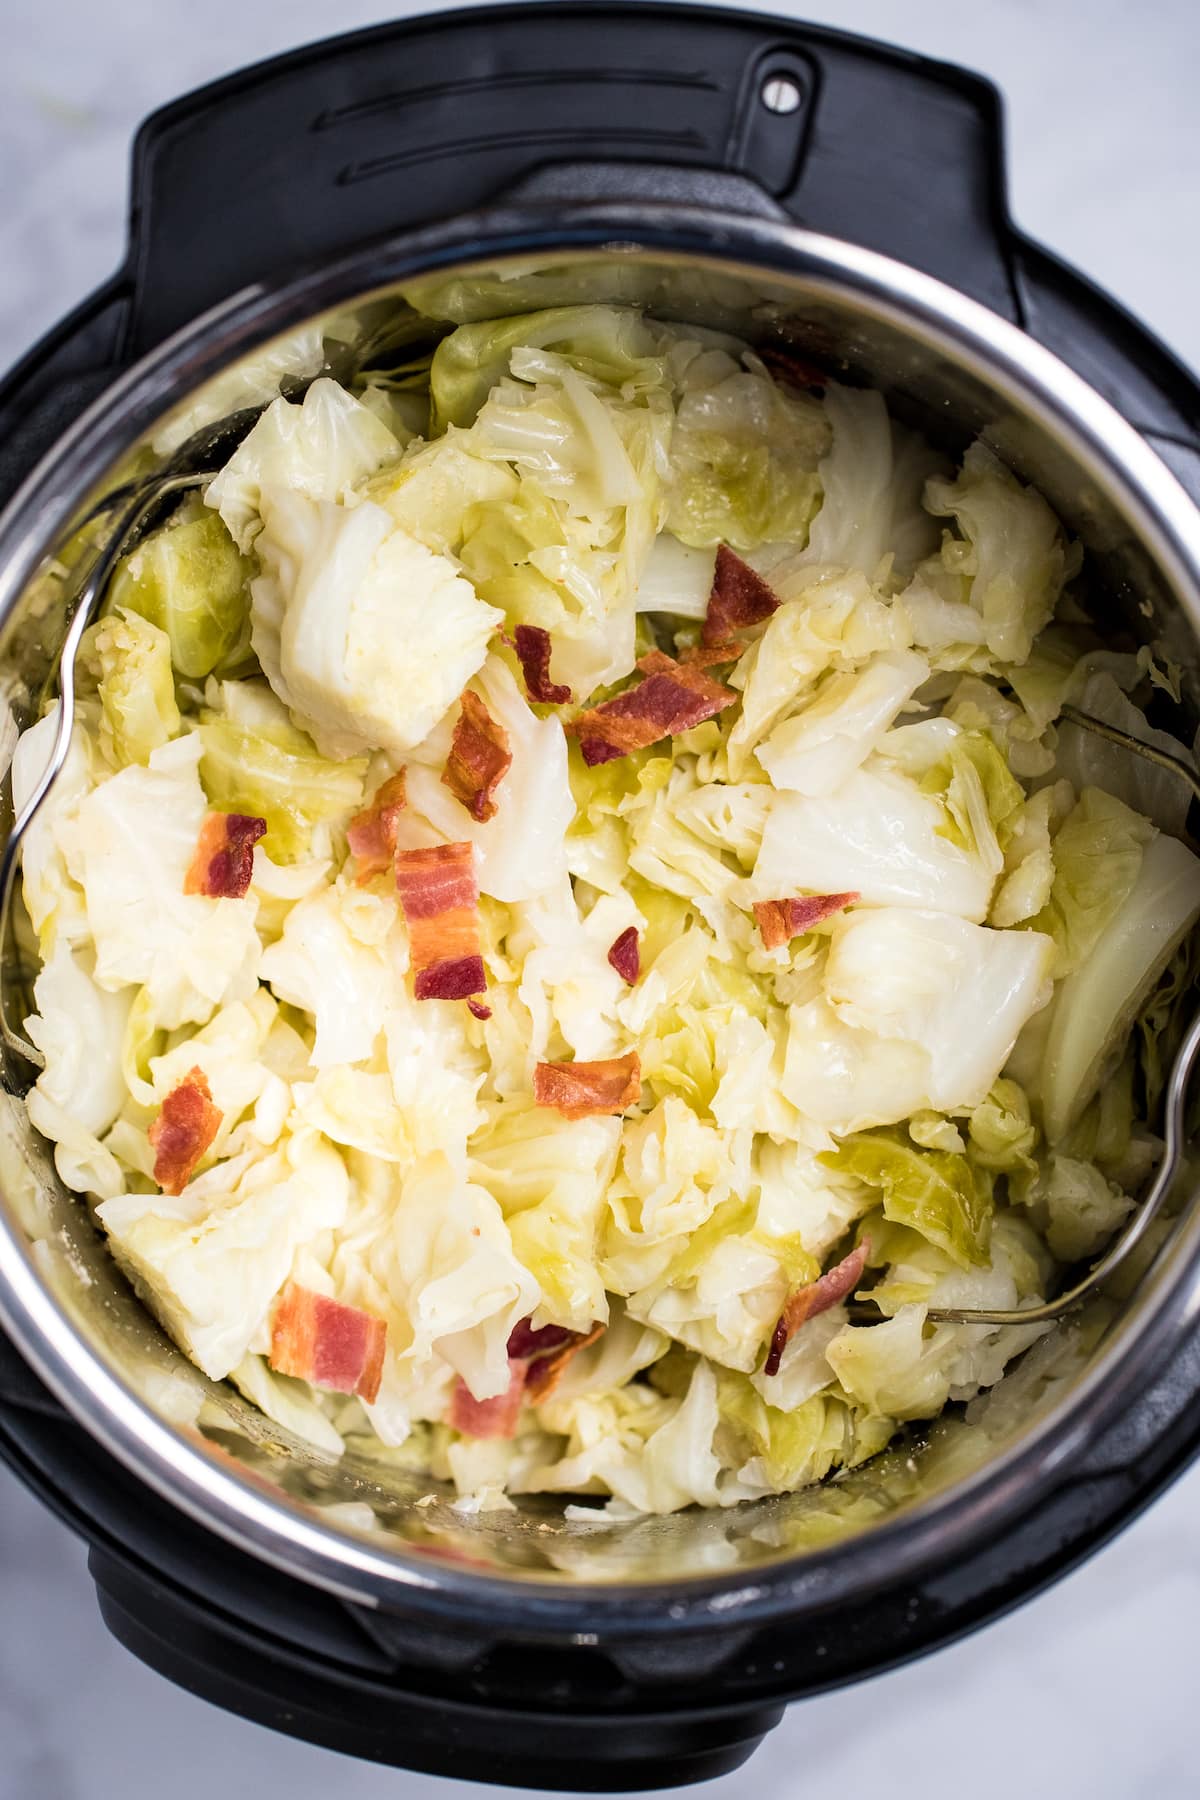 An instant pot full of cooked buttered cabbage topped with crispy bacon pieces.